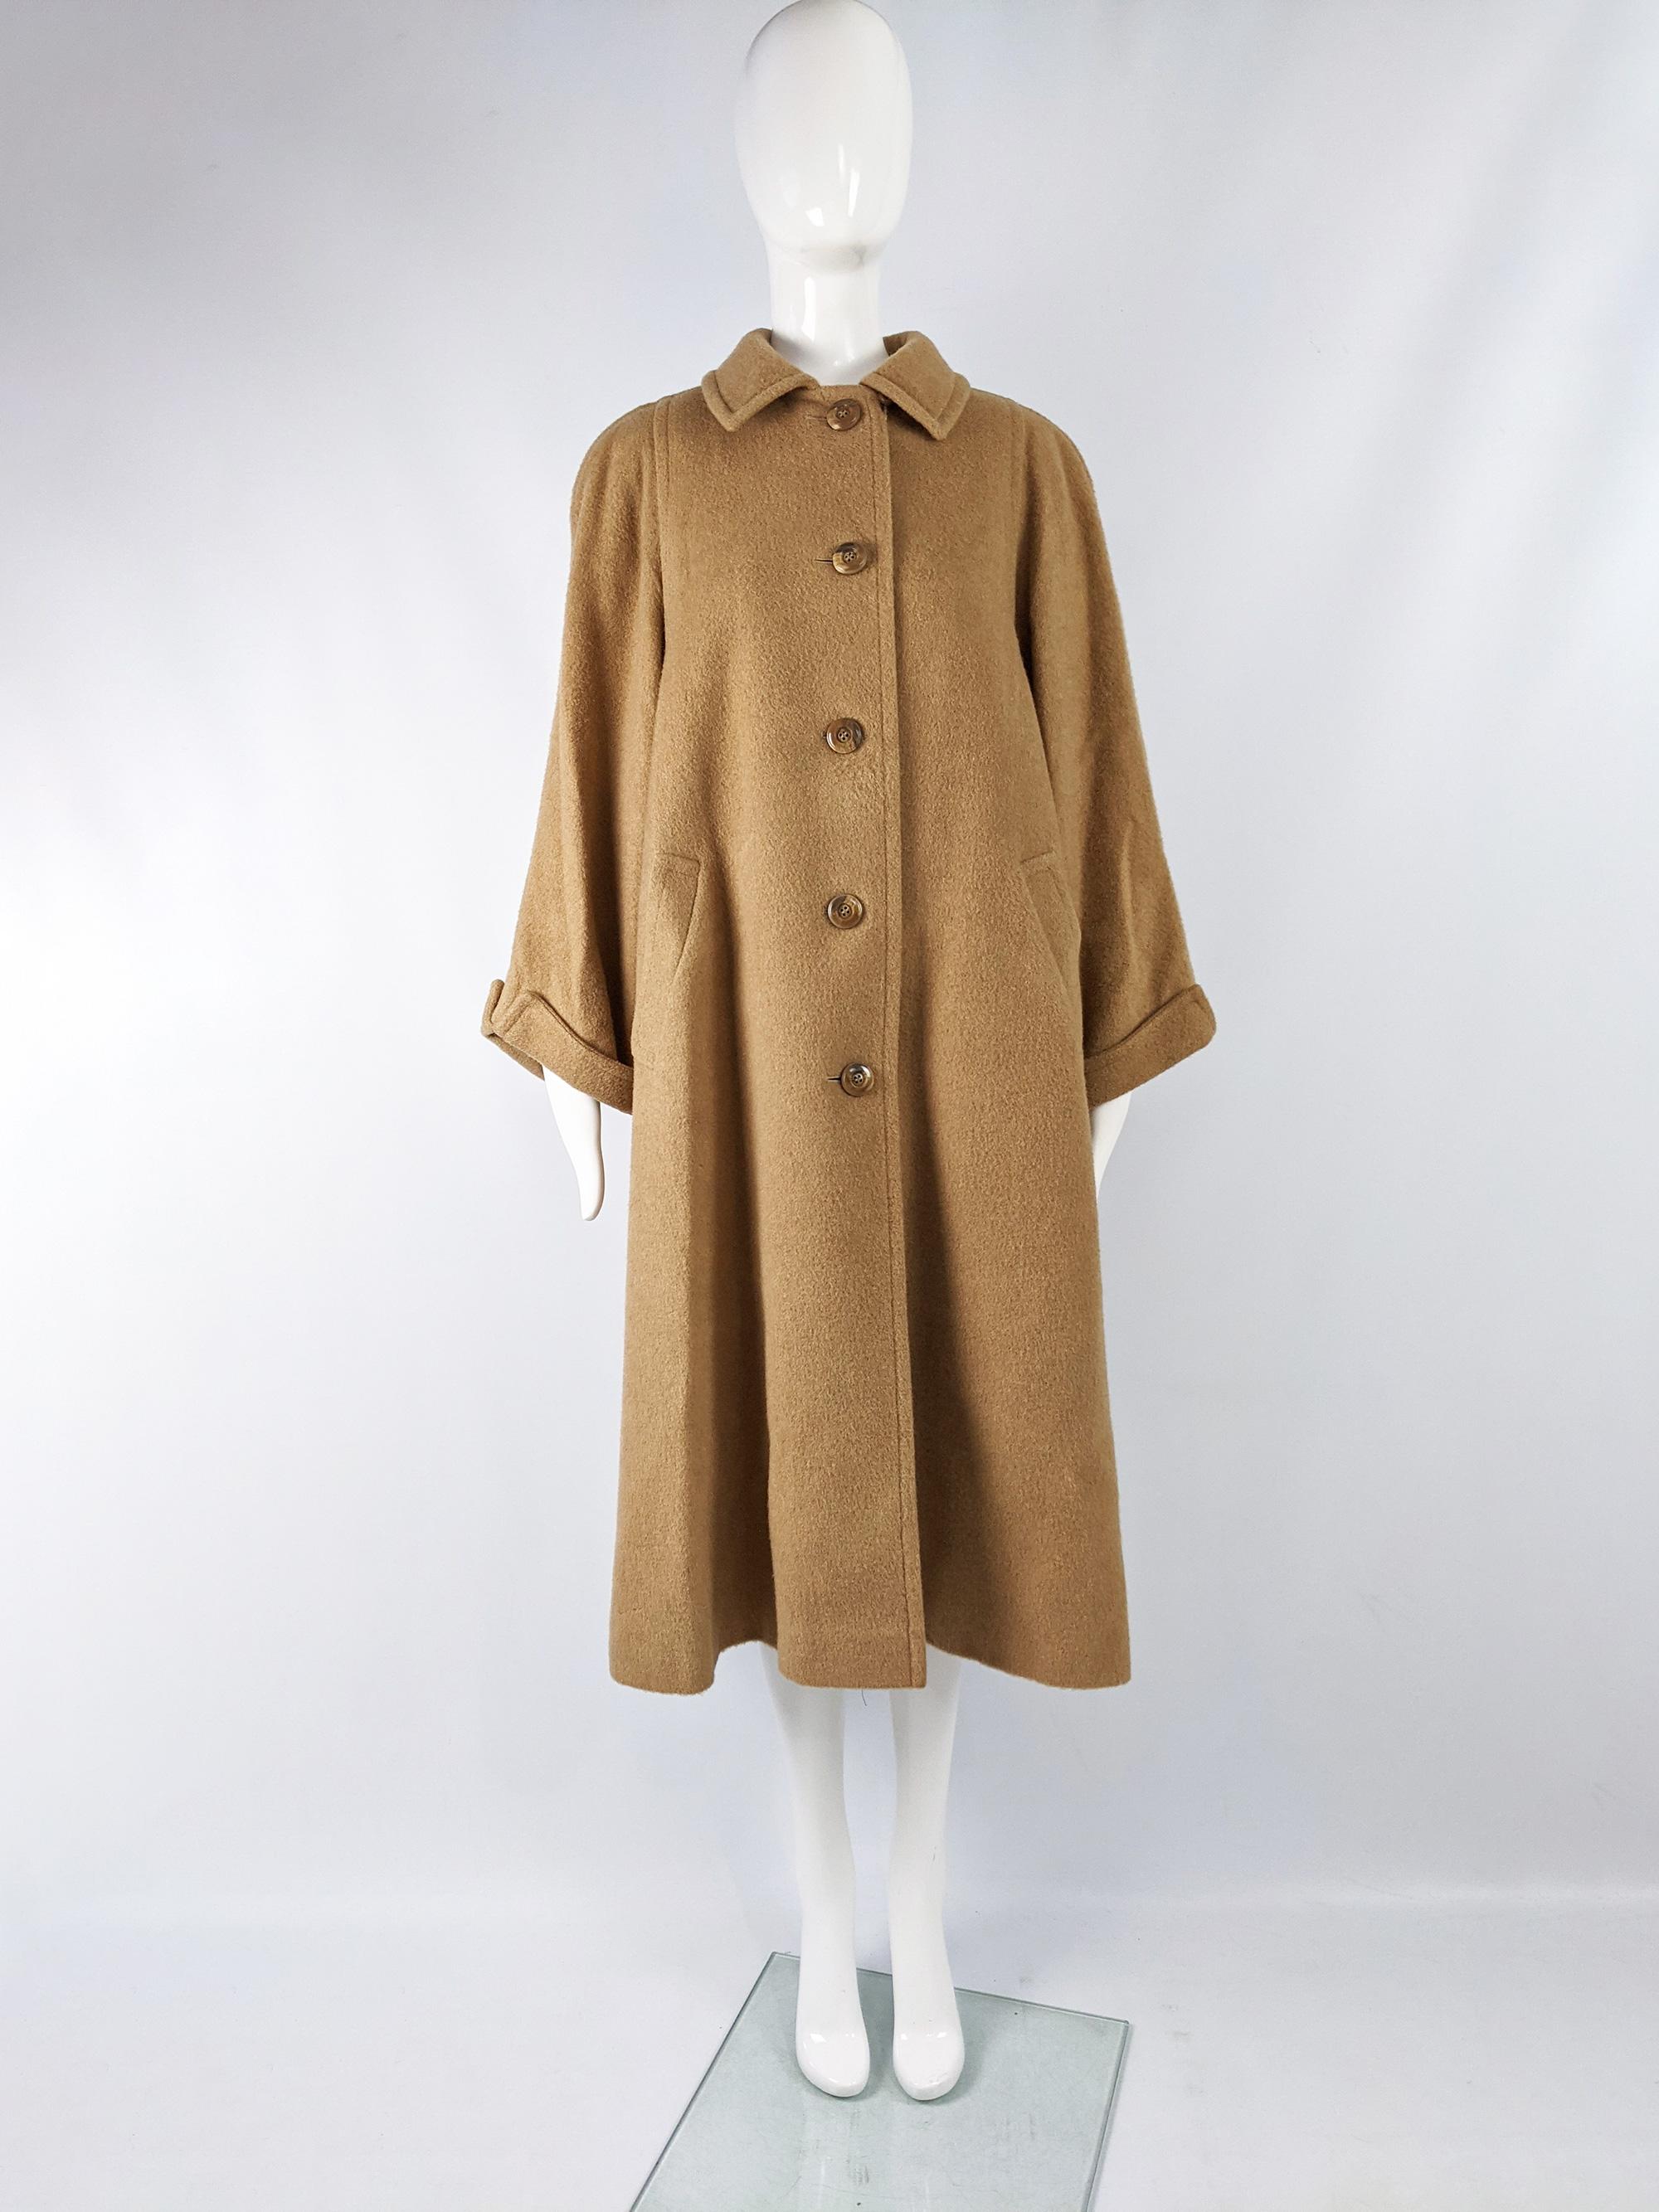 A fabulous vintage womens swing coat from the 60s by luxury British fashion house, Aquascutum. In a brown pure camel hair with wide sleeve and an oversized trapeze fit.

Size: Marked UK 10 which equates to a US 6/ EU 38 but this gives a huge,